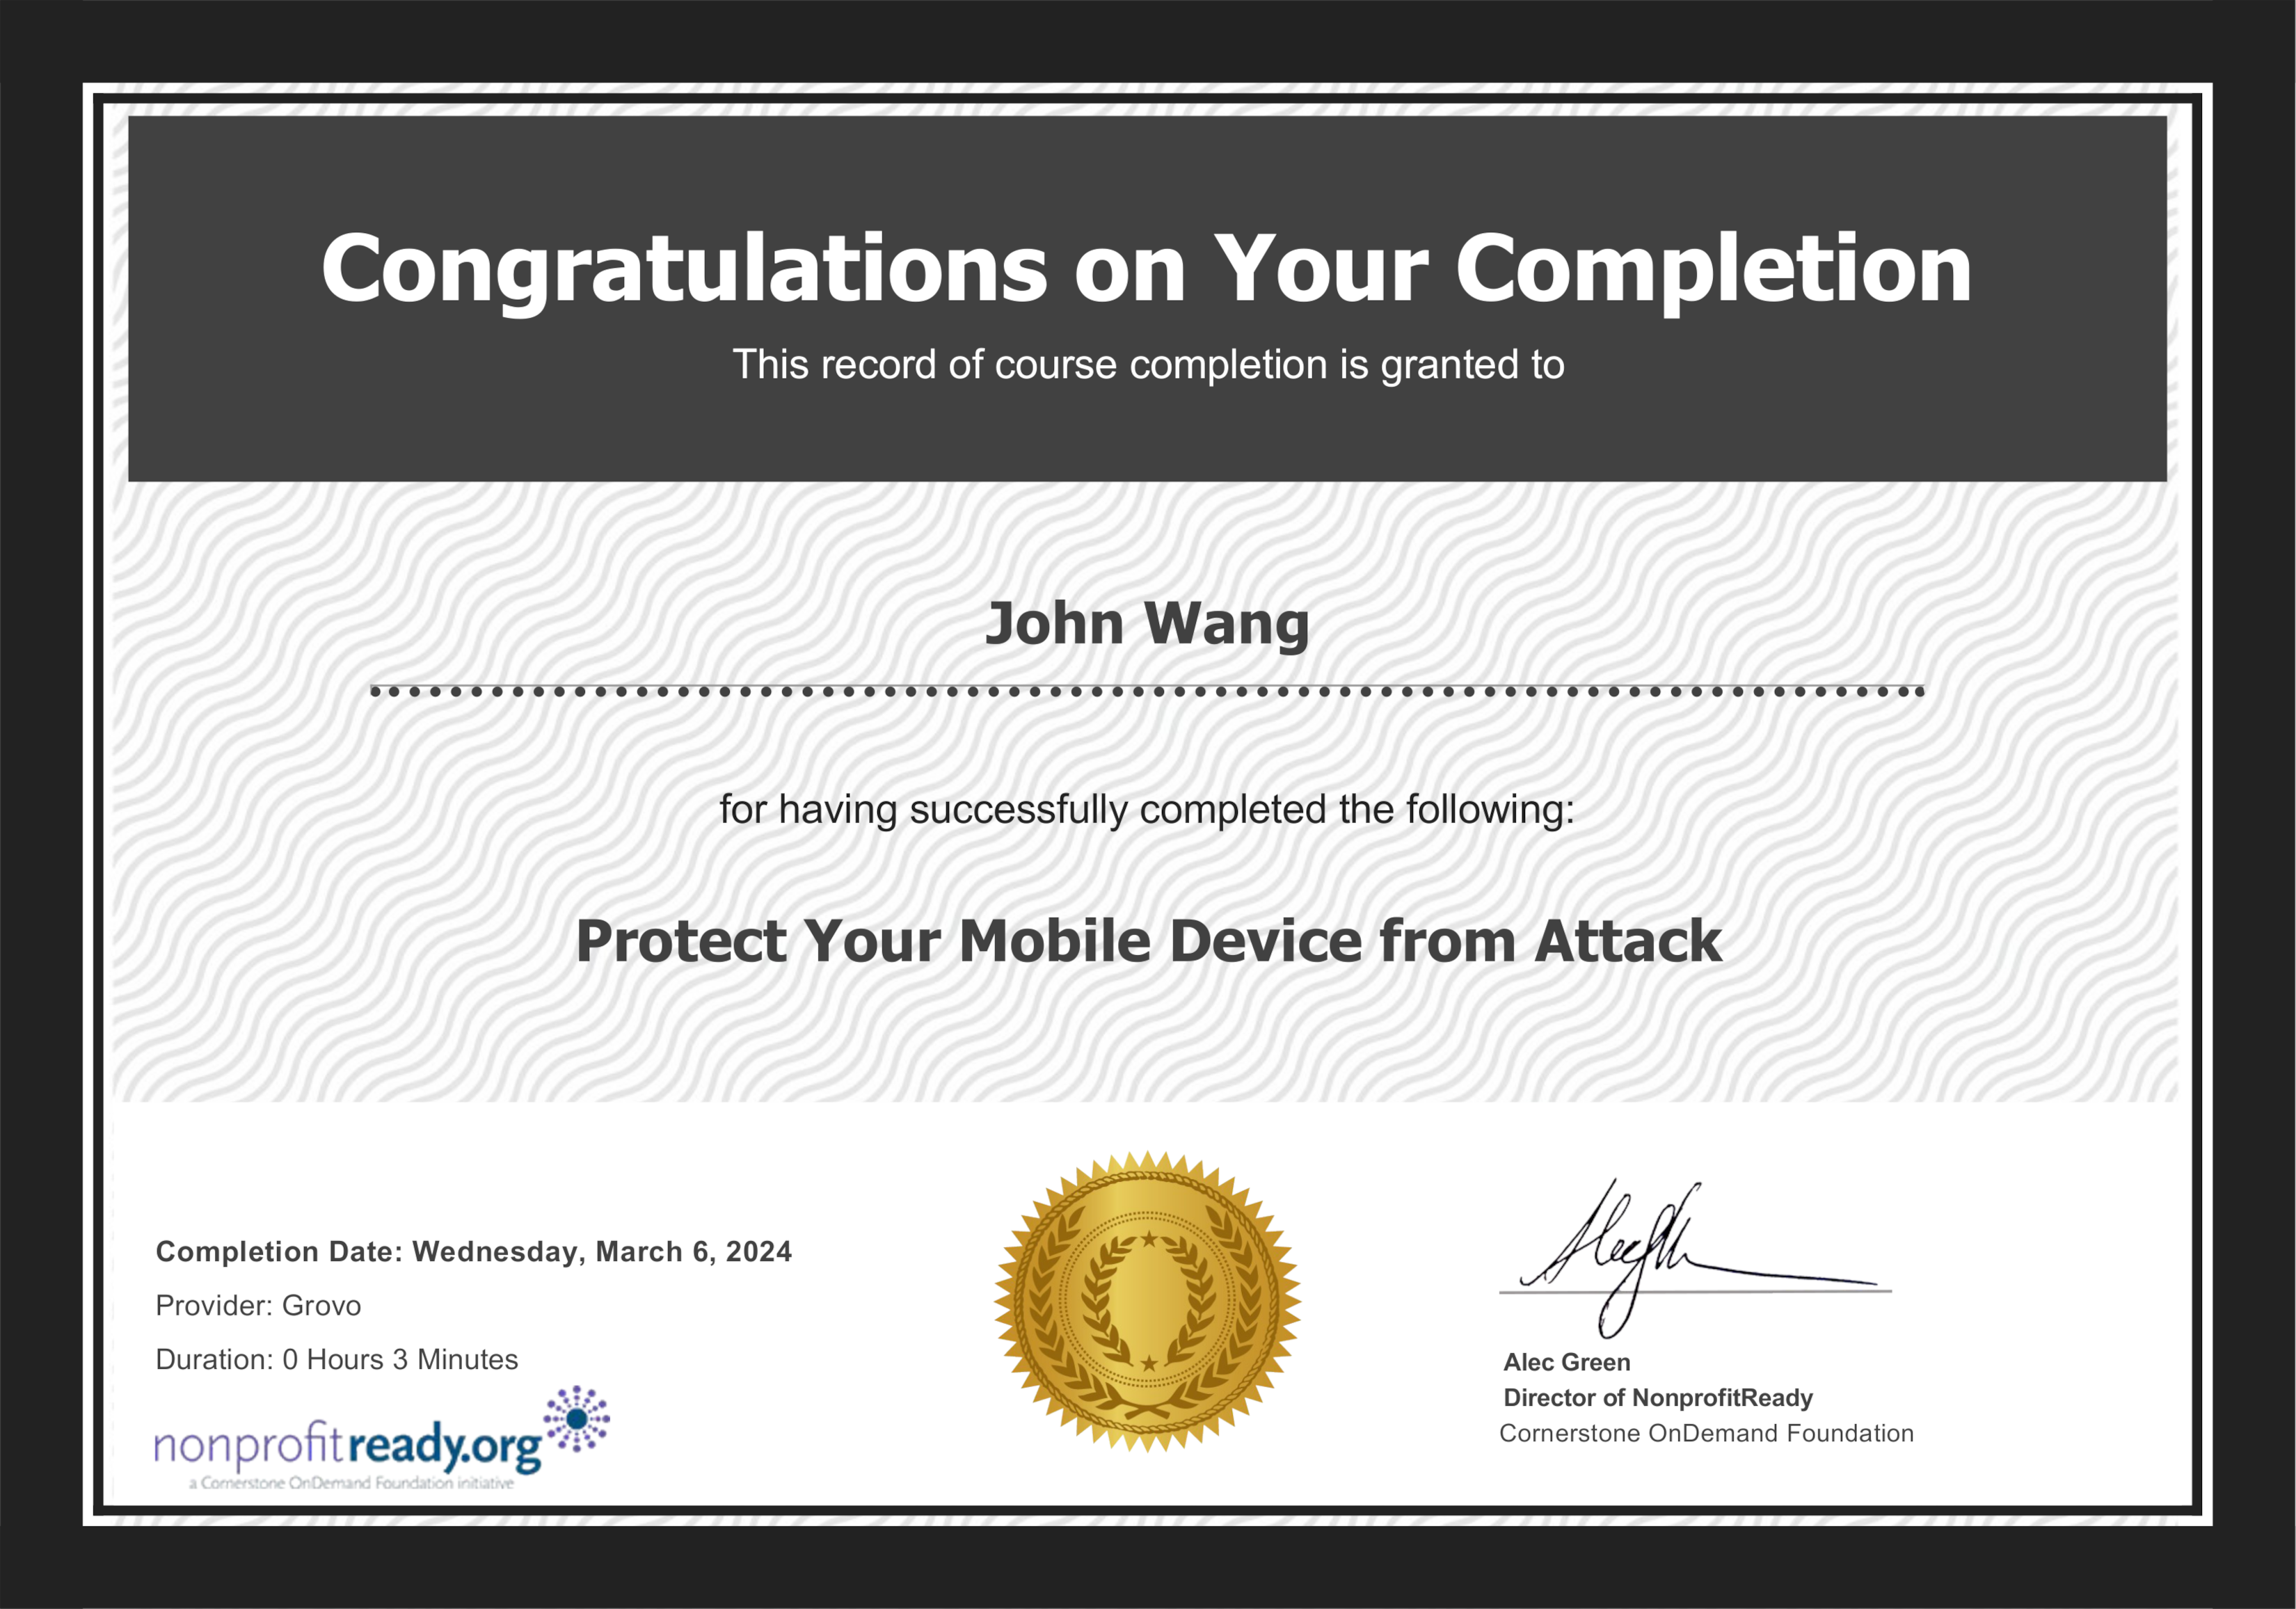 John's Protect Your Mobile Device from Attack from NonprofitReady